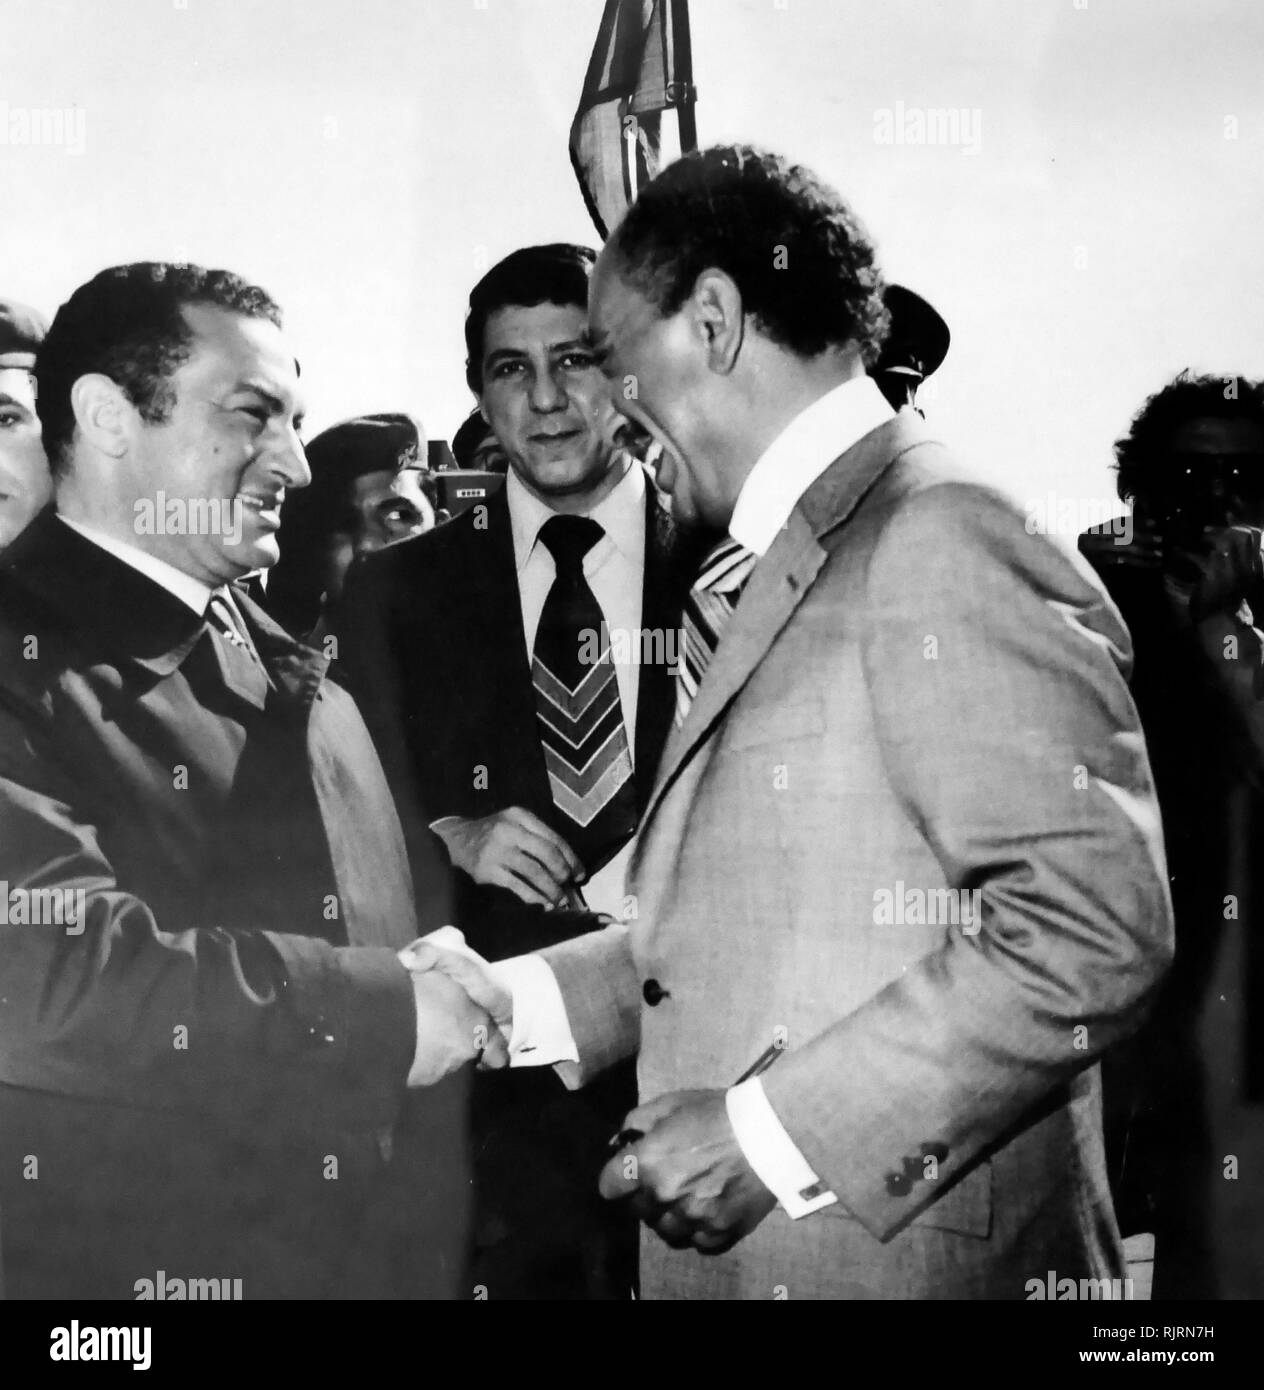 Vice President of Egypt, Hosni Mubarak with Anwar Sadat , President of Egypt, from 1970 until his assassination by fundamentalist army officers on 6 October 1981. Sadat was a senior member of the Free Officers who overthrew King Farouk in the Egyptian Revolution of 1952, and a close confidant of President Gamal Abdel Nasser, under whom he served as Vice President twice and whom he succeeded as President in 1970. Stock Photo